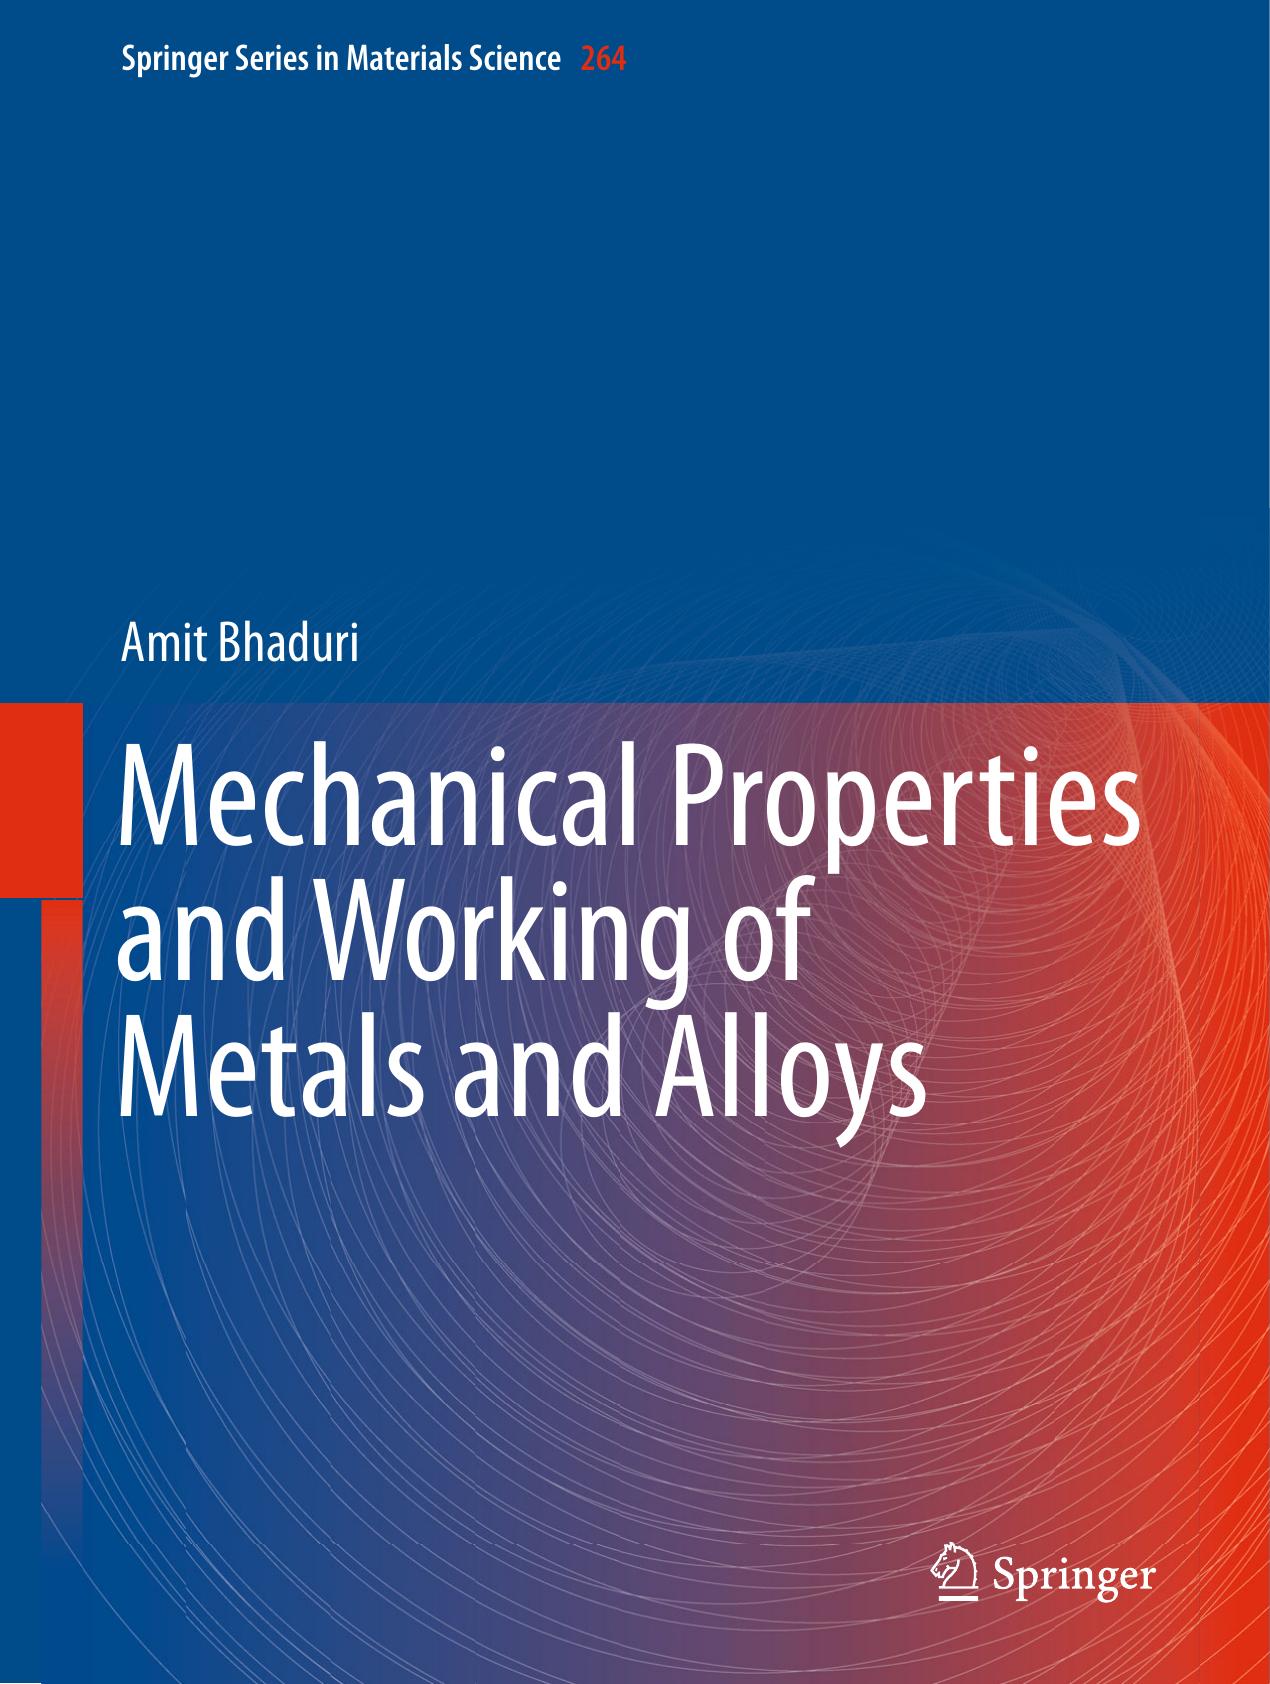 Mechanical Properties and Working of Metals and Alloys by Amit Bhaduri